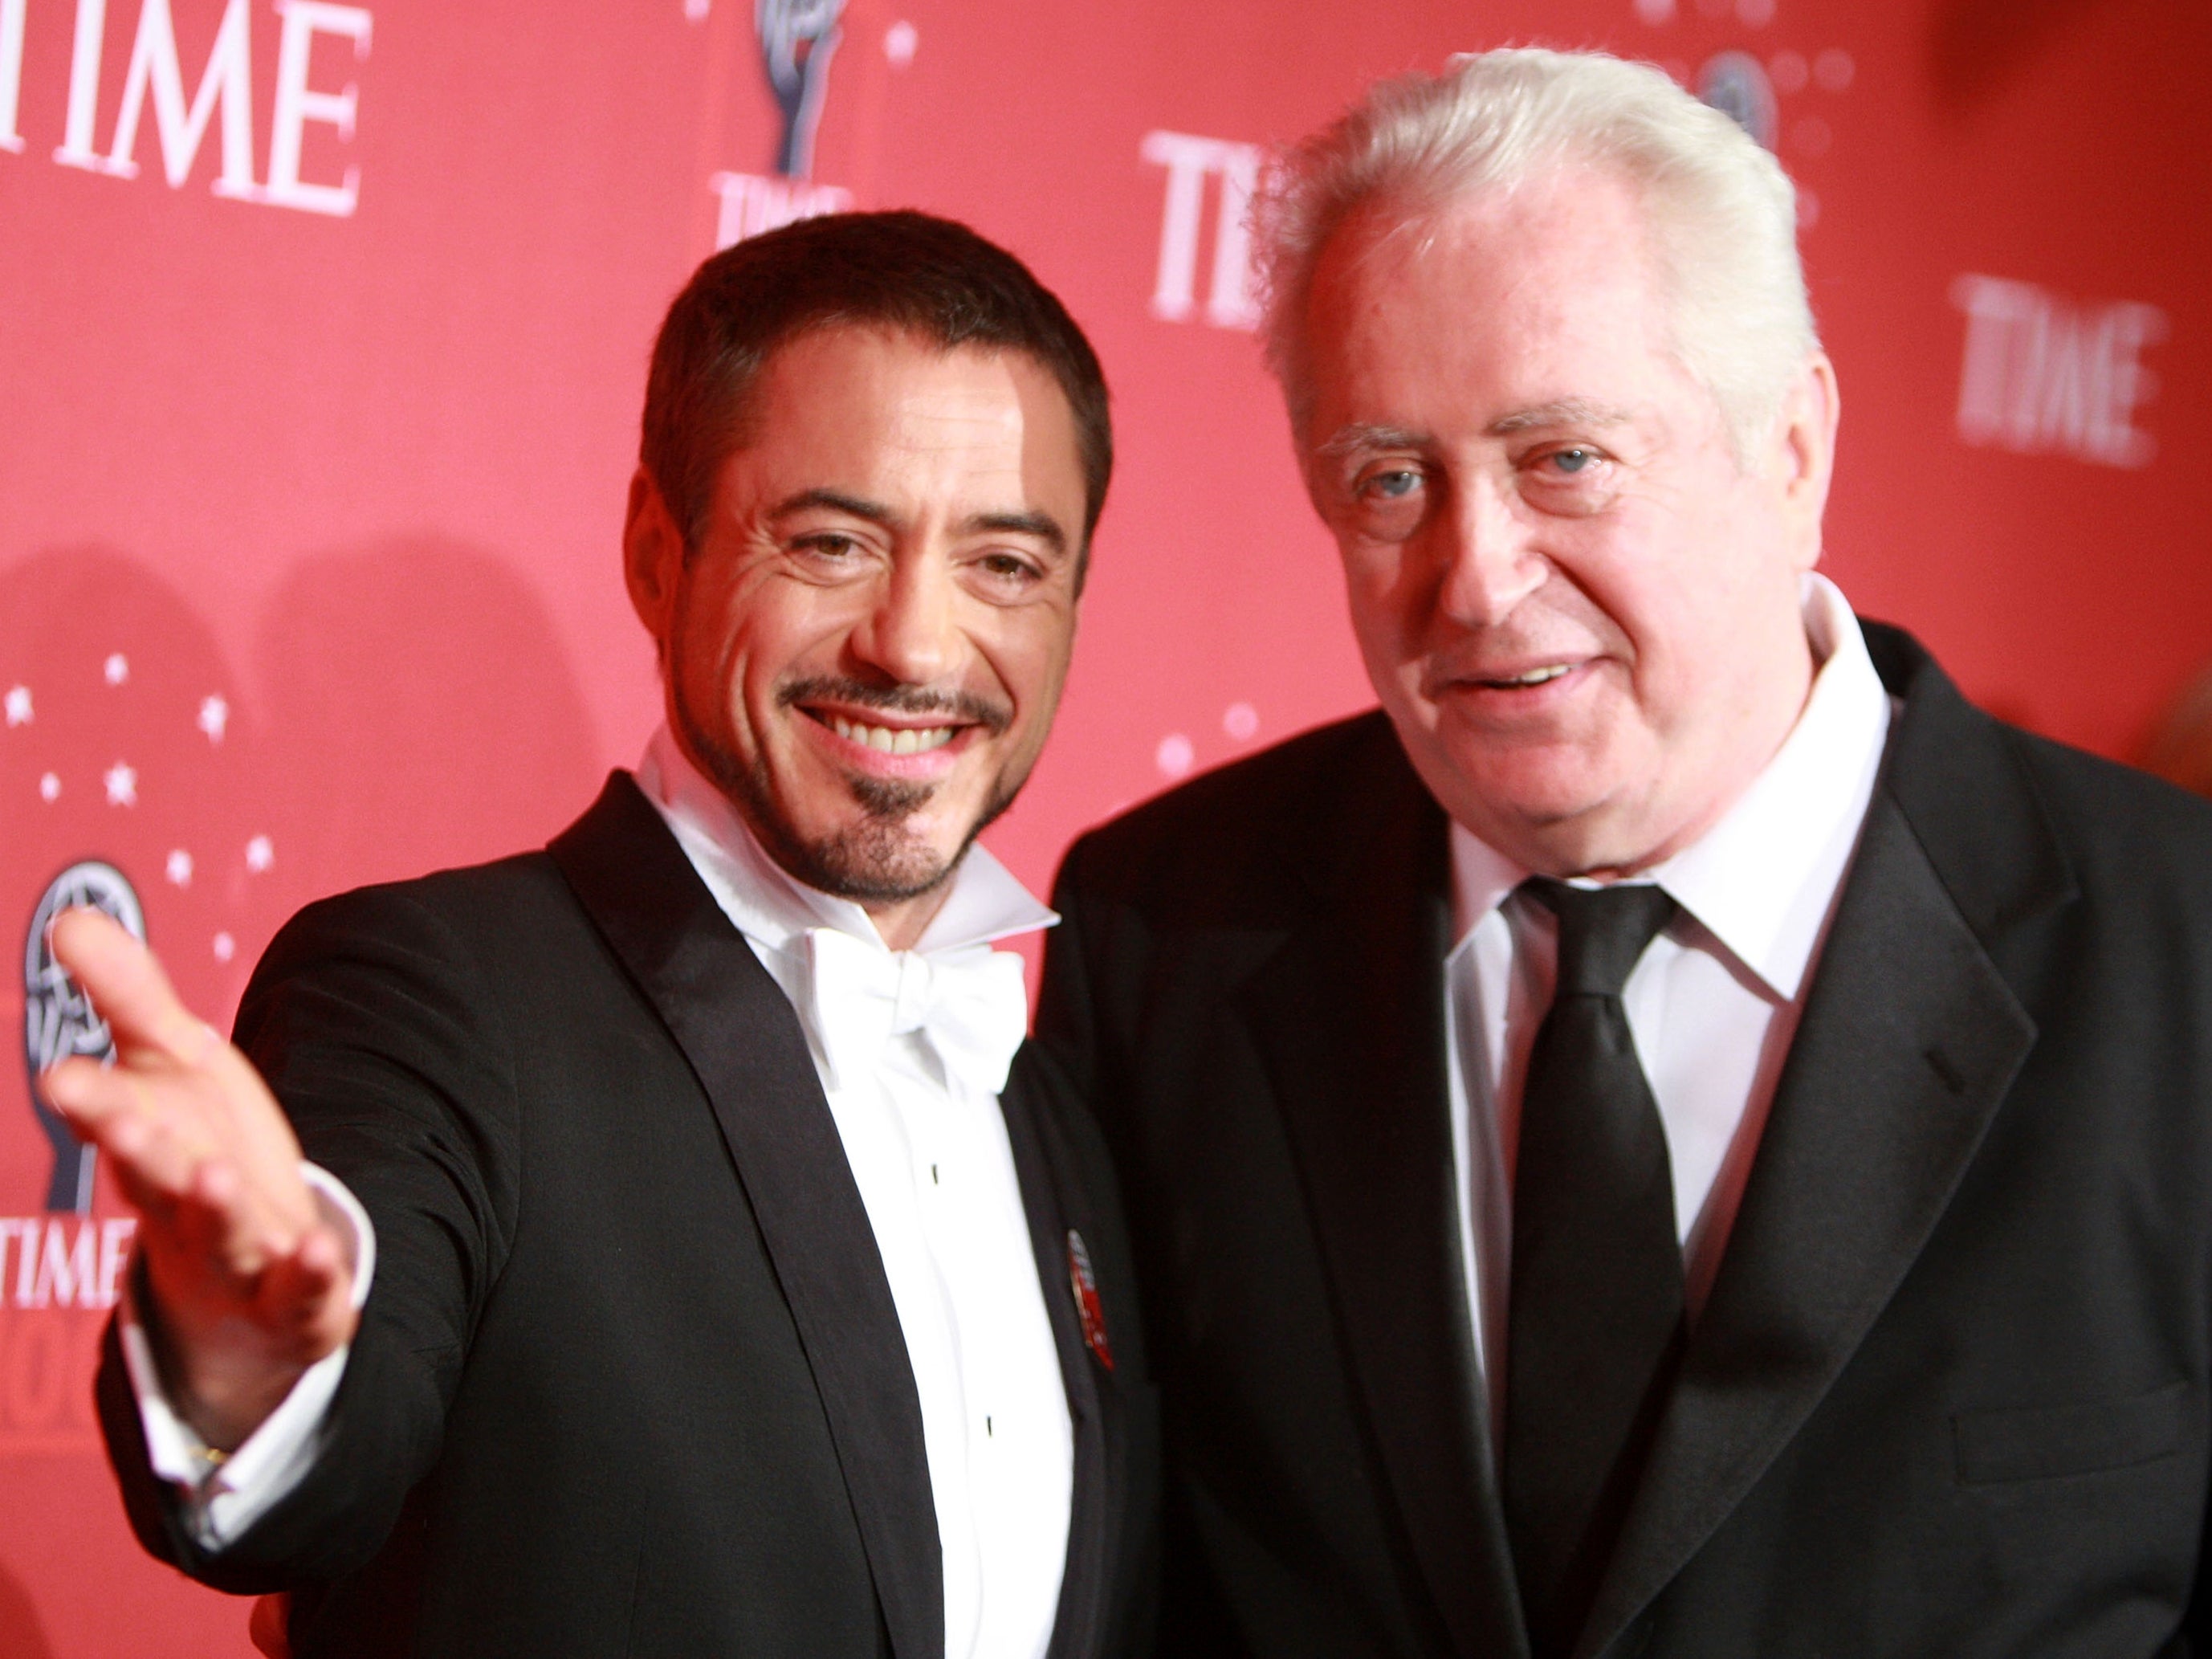 Actor Robert Downey Jr. and father Robert Downey Sr at TIME’s 100 Most Influential People Gala on 8 May 2008 in New York City